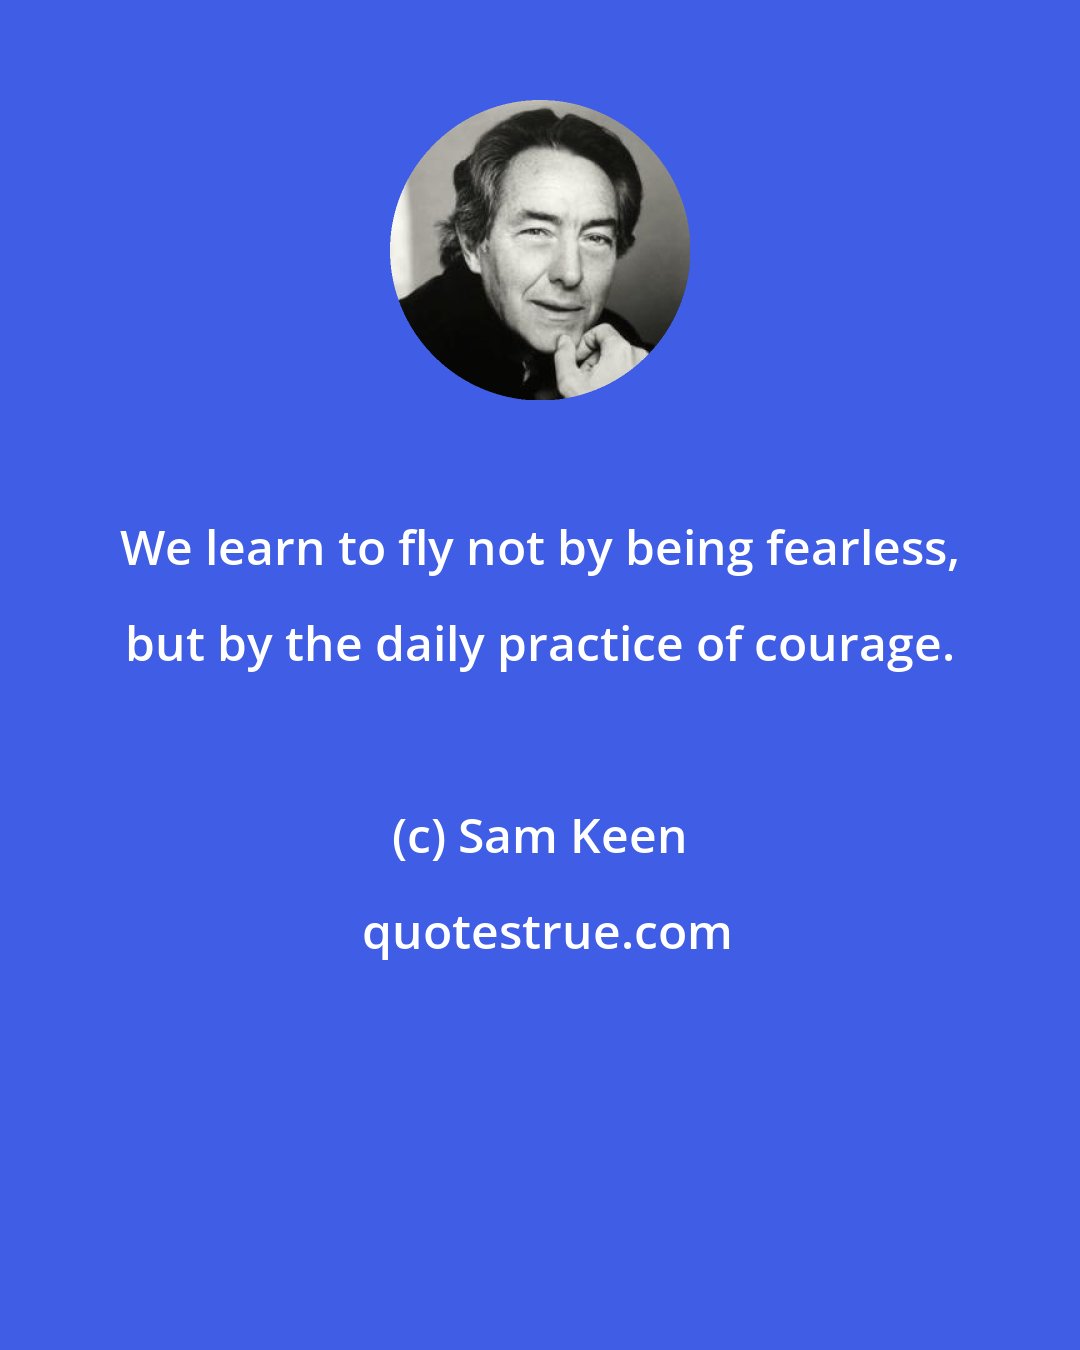 Sam Keen: We learn to fly not by being fearless, but by the daily practice of courage.